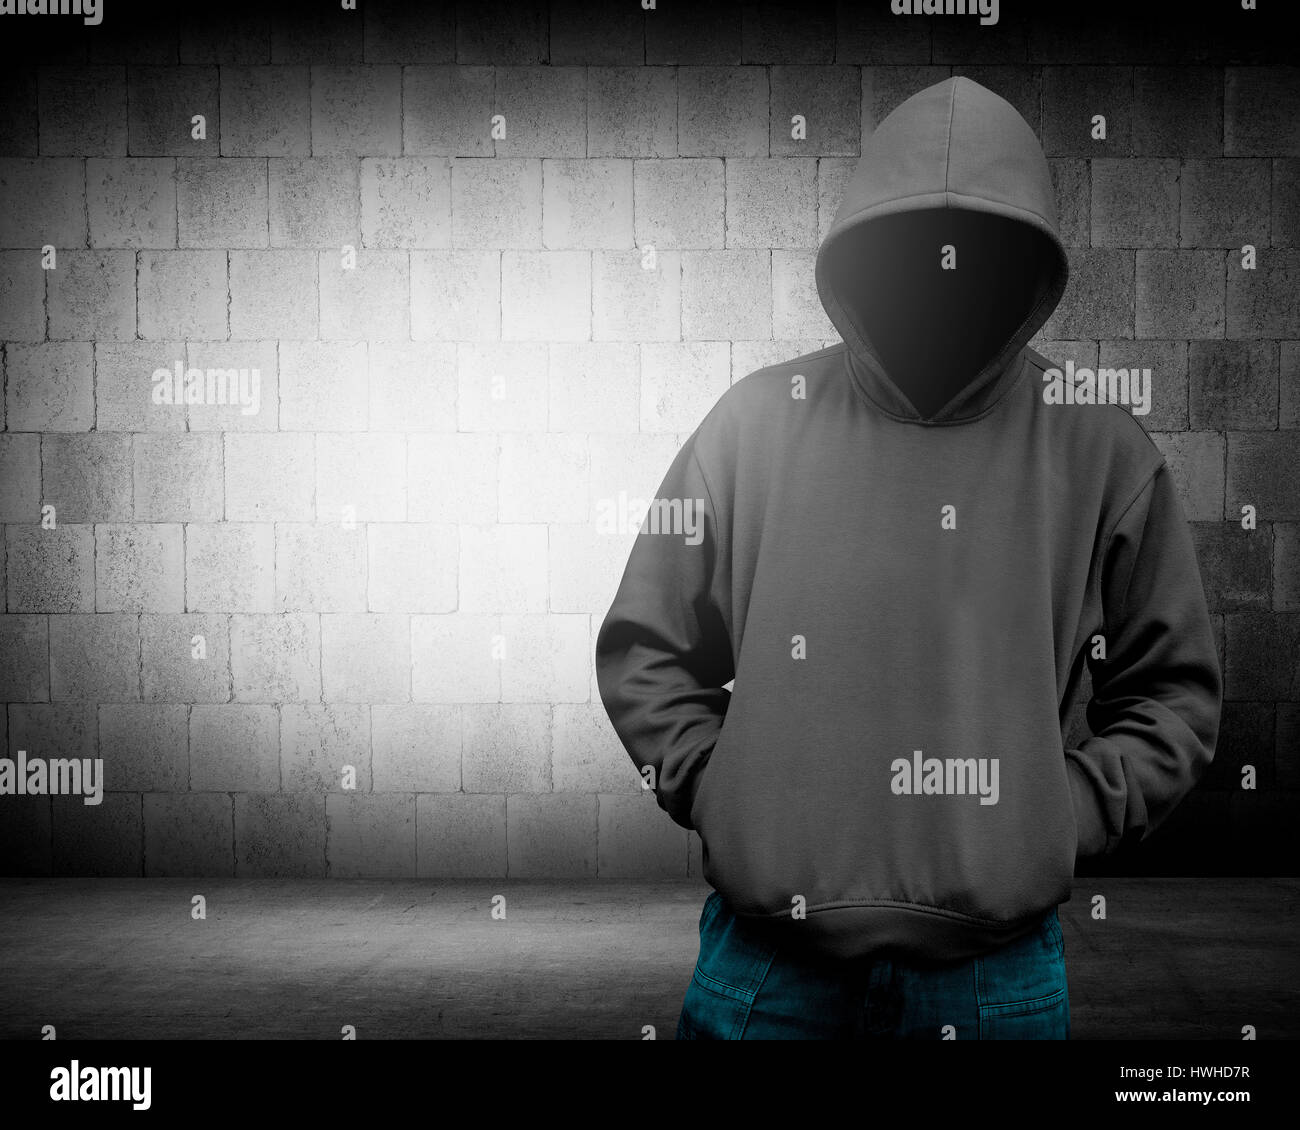 Computer hacker silhouette of hooded man. Threat of your security Stock Photo